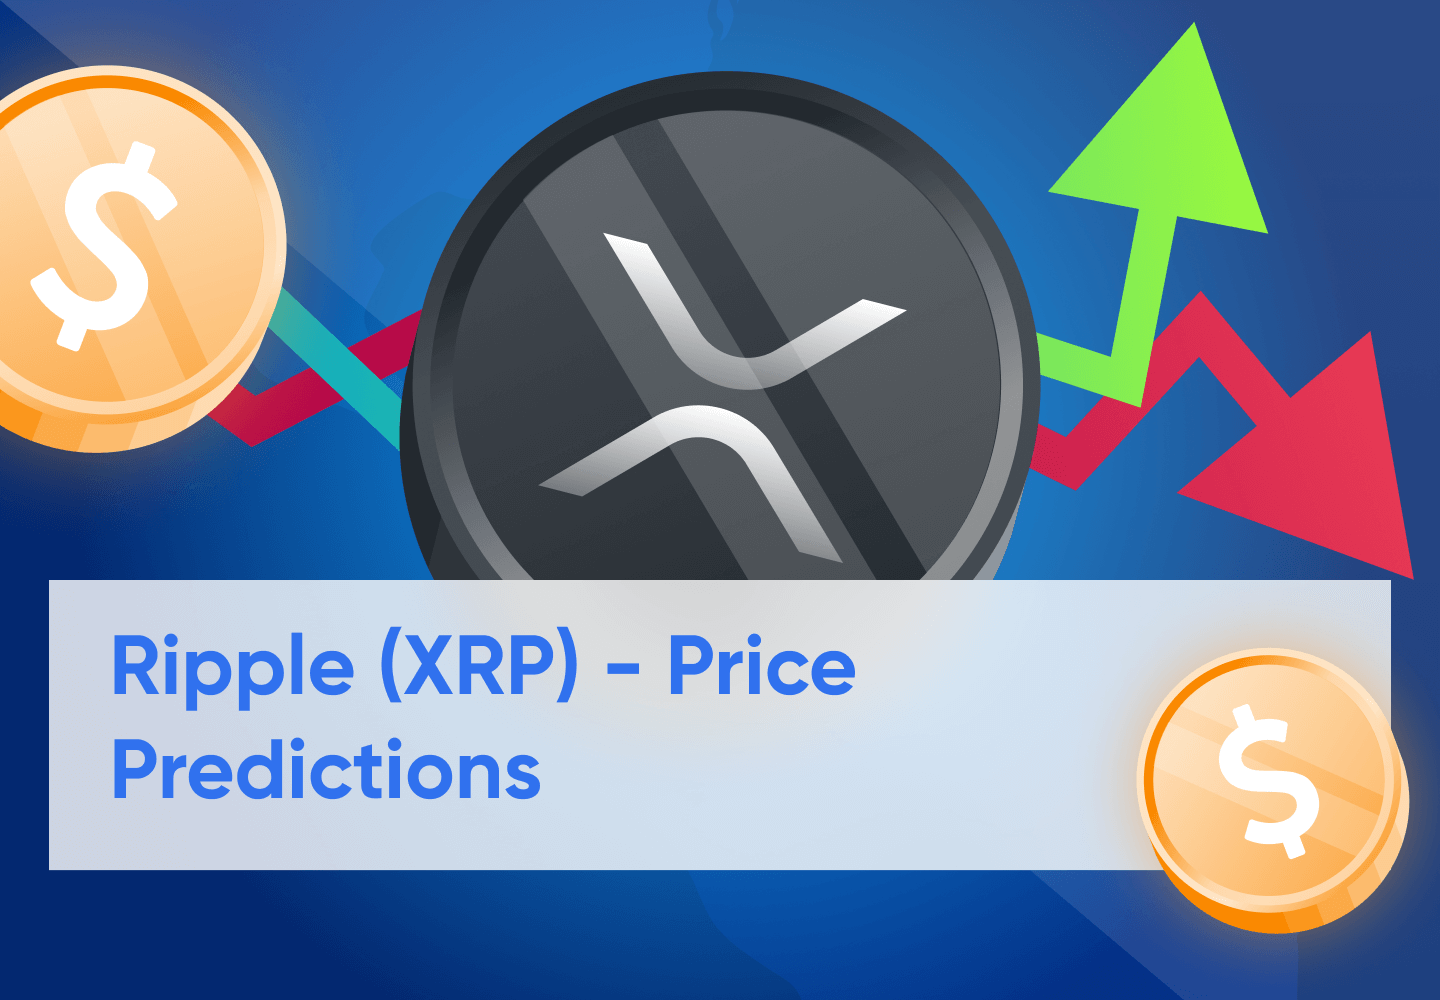 Ripple (XRP) Long-Term Price Predictions From 2024 - 2030